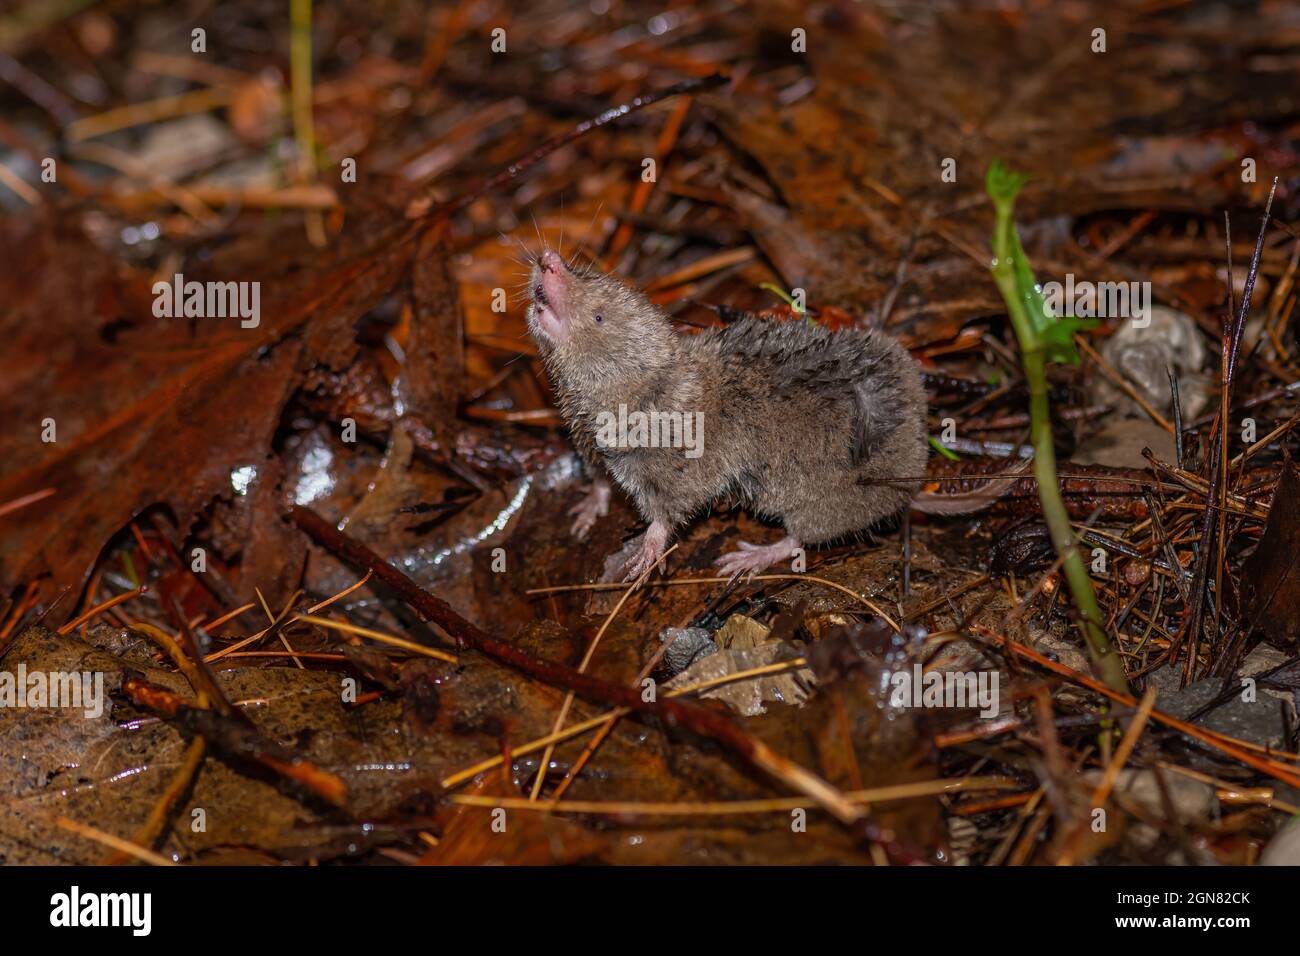 A Northern short-tailed shrew (Blarina brevicauda) searching for food in Michigan, USA. Stock Photo